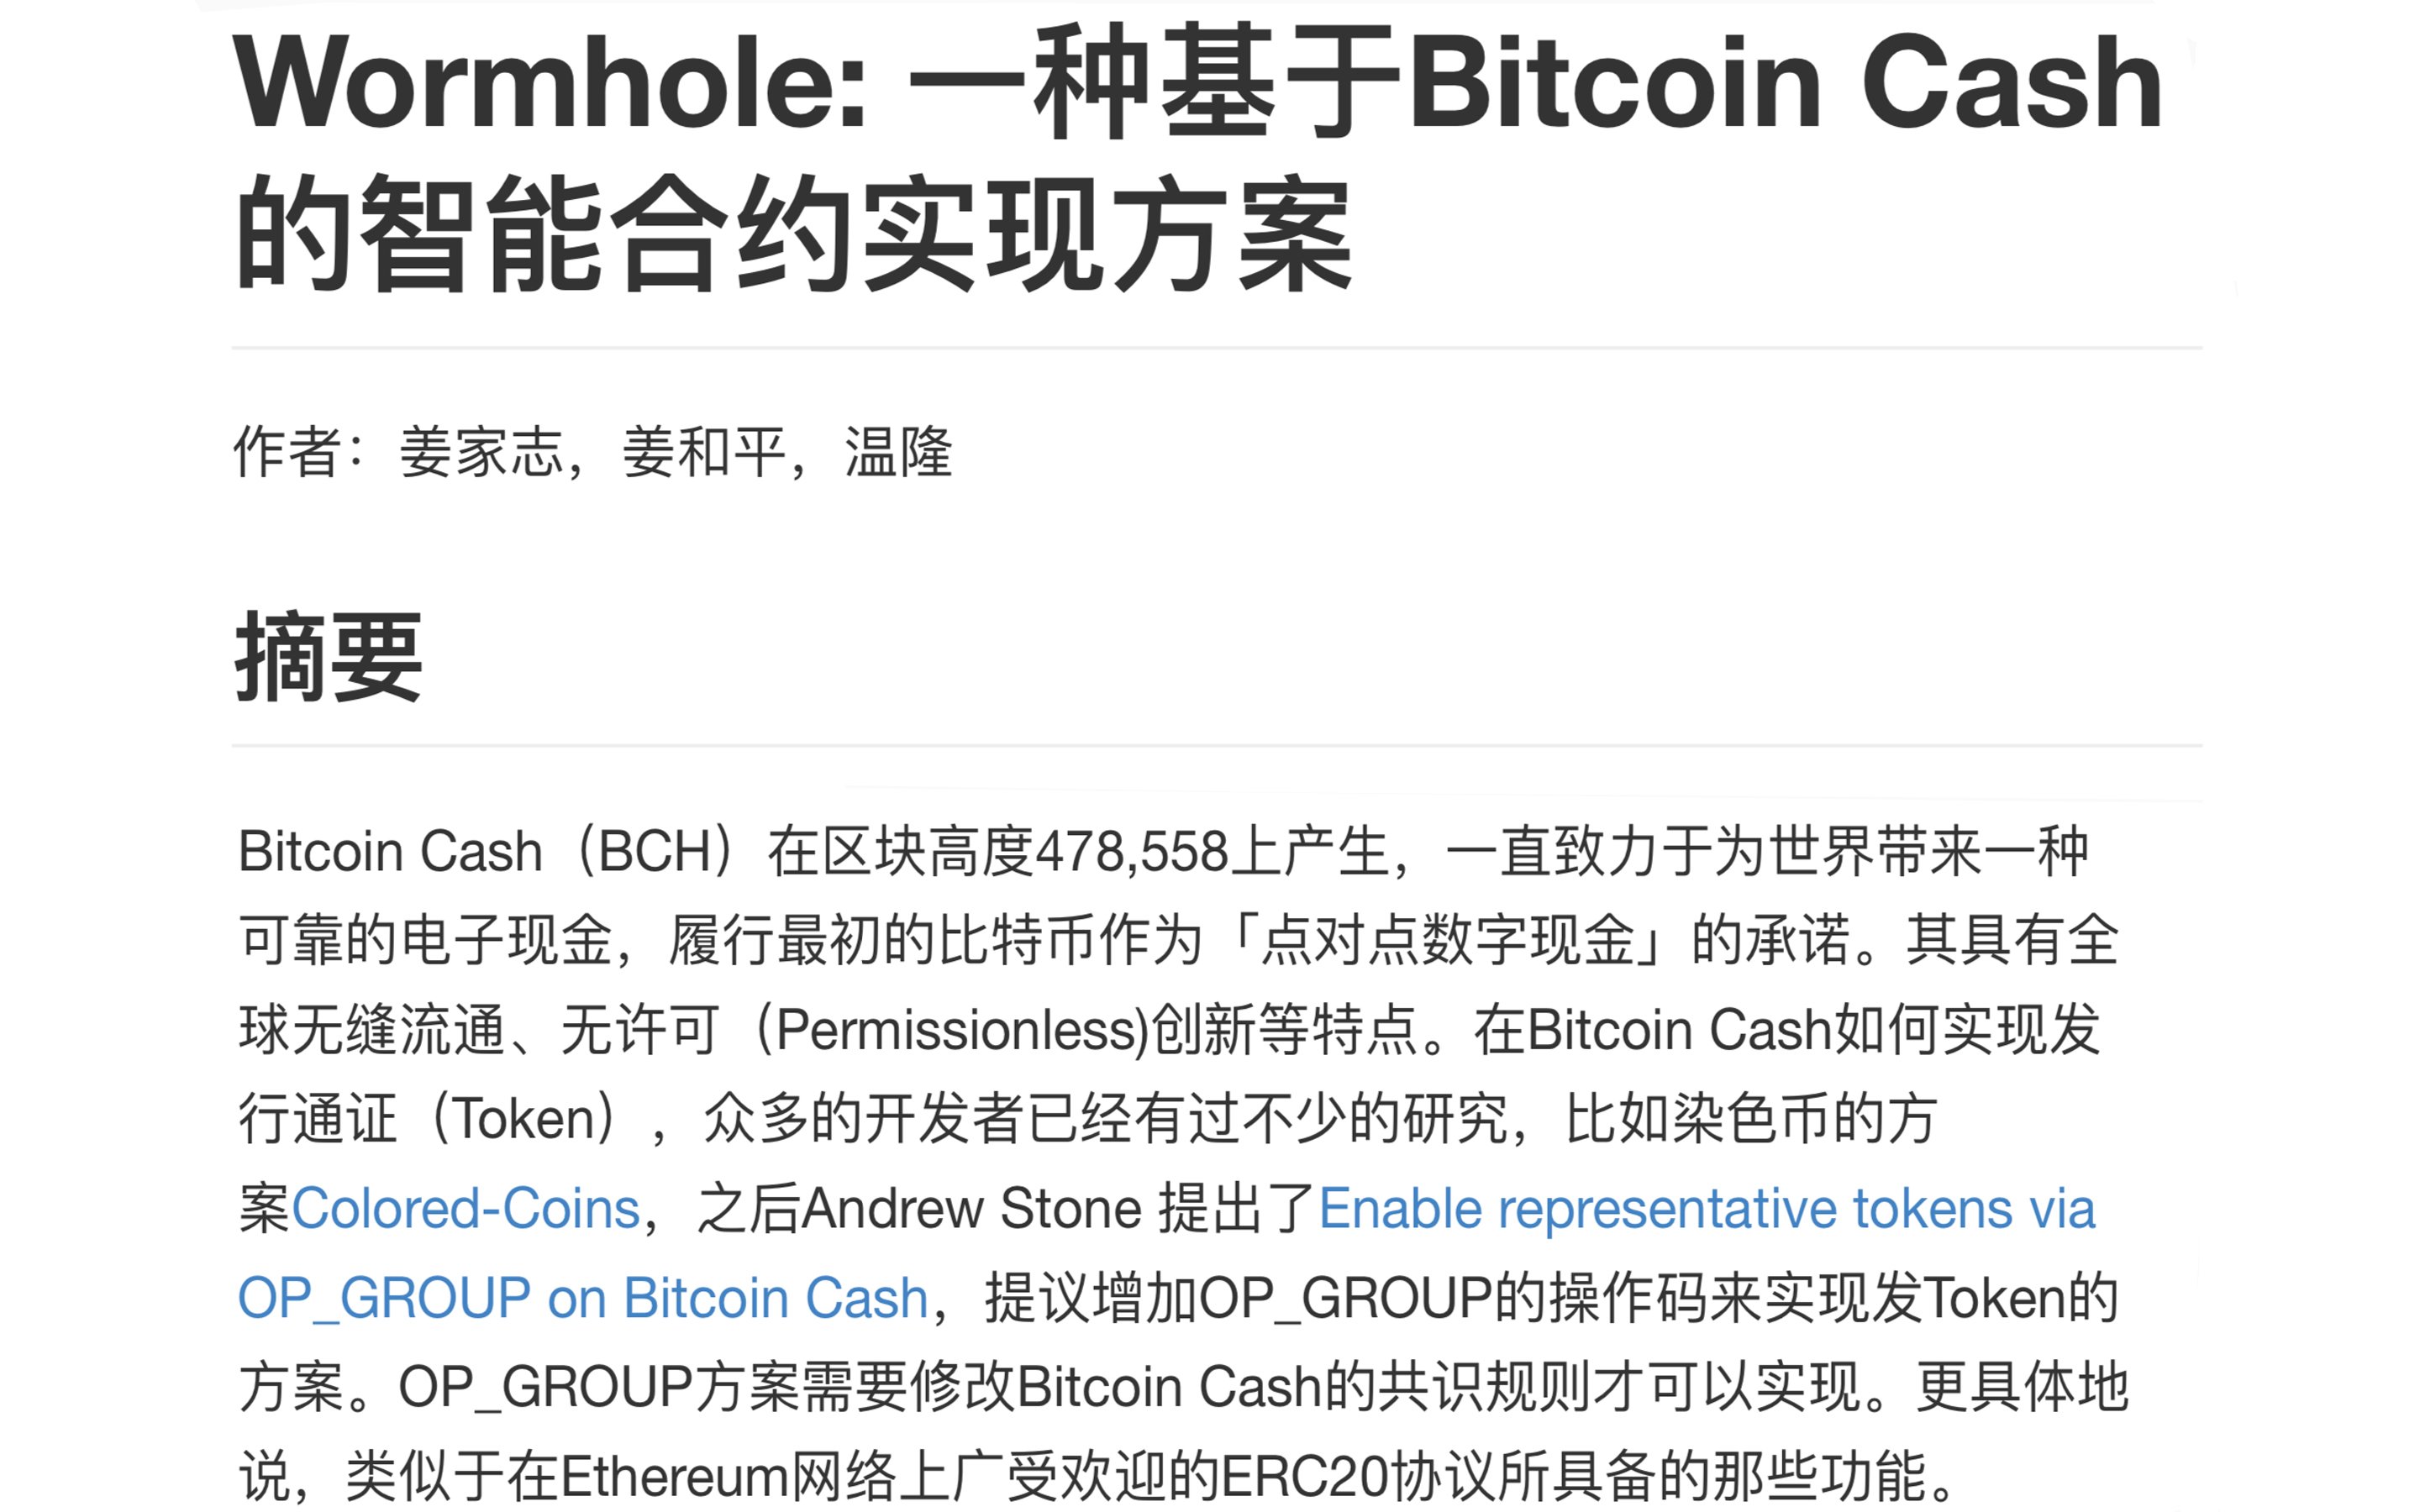 Wormhole Project Launches — $1.2M Worth of BCH Burned So Far